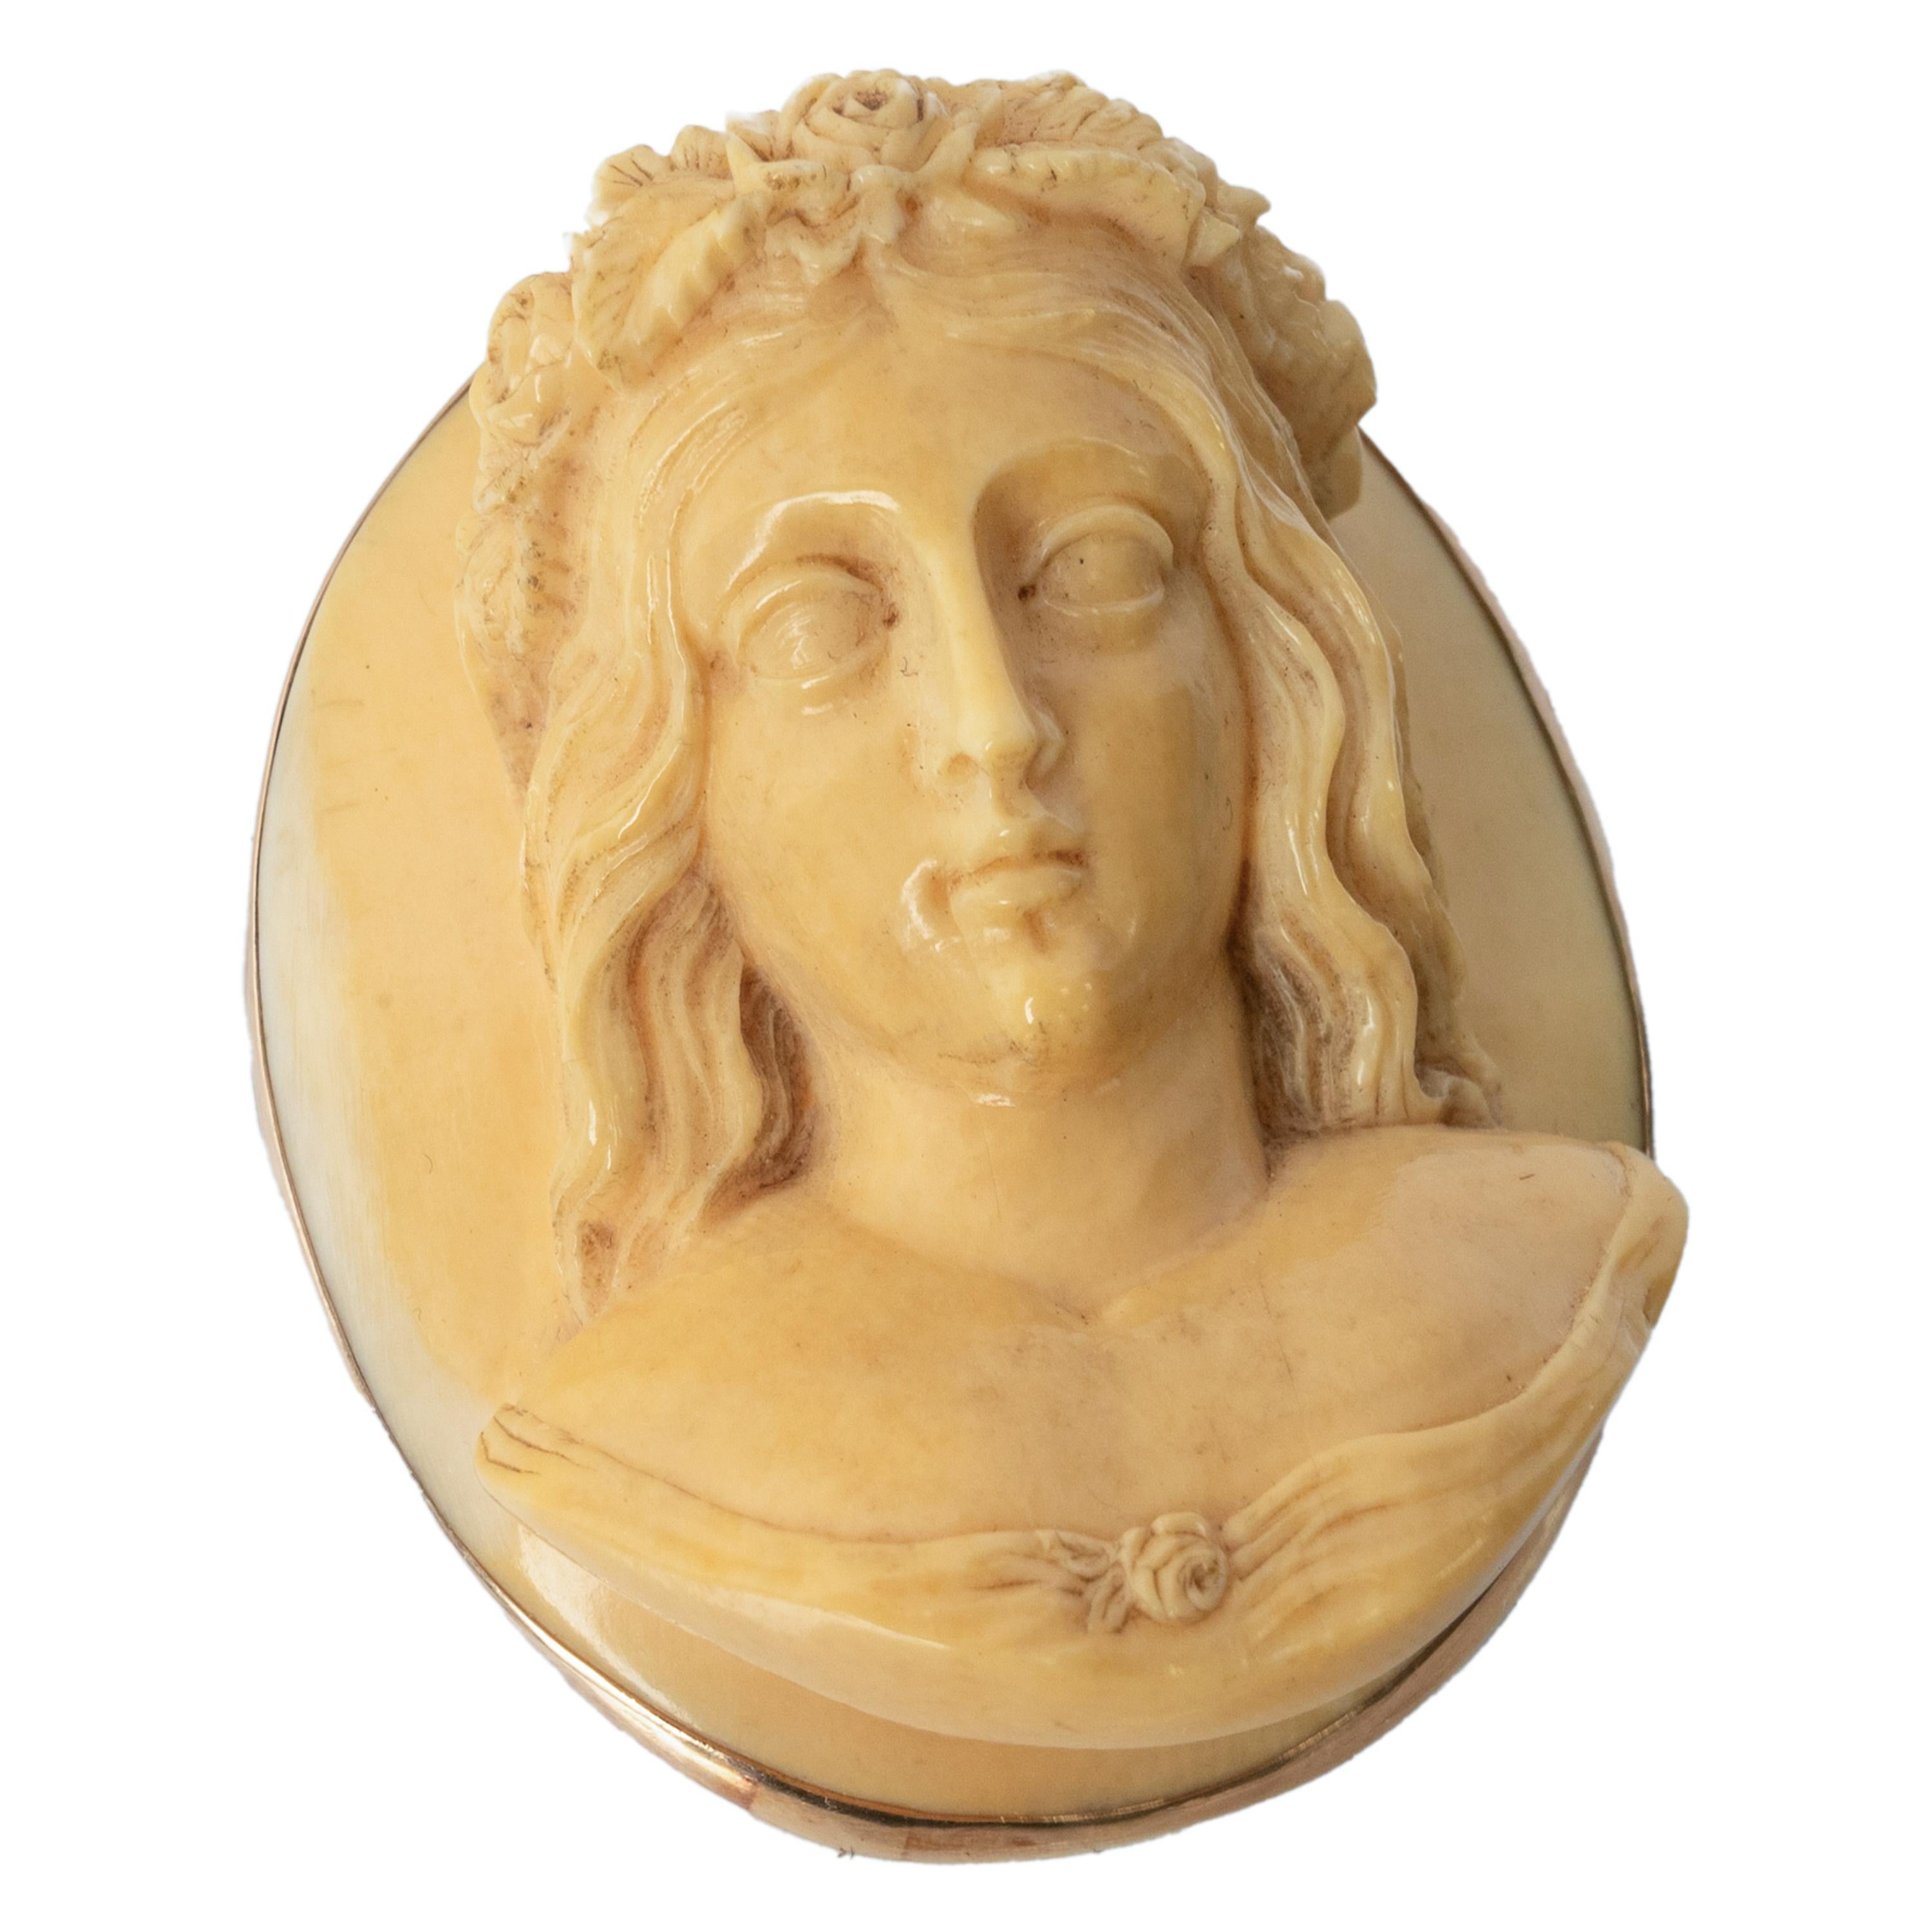 A very elegant carved ivory & 14 karat gold cameo brooch & pendant, Italy, circa 1870.
This very lovely cameo is carved as a beautiful Pre-Raphalite maiden, the cameo is finely & deeply carved, depicting the young maiden with flowers in her tresses.